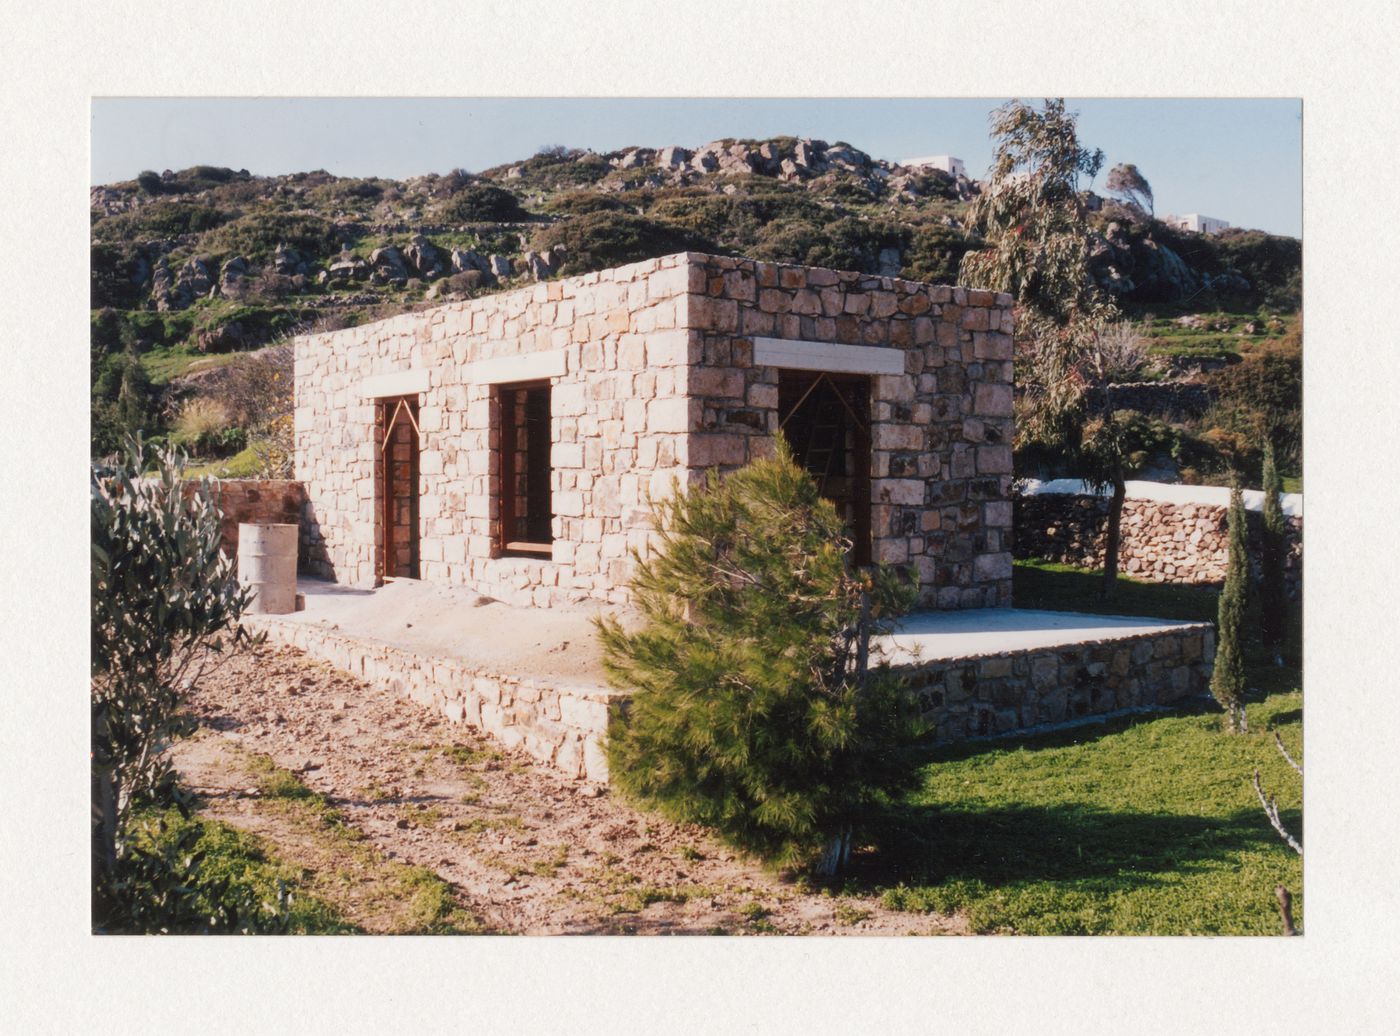 Photograph of a building in Greece used as a postcard, from Dimitri (Konstantinidis?) to Kenneth Frampton